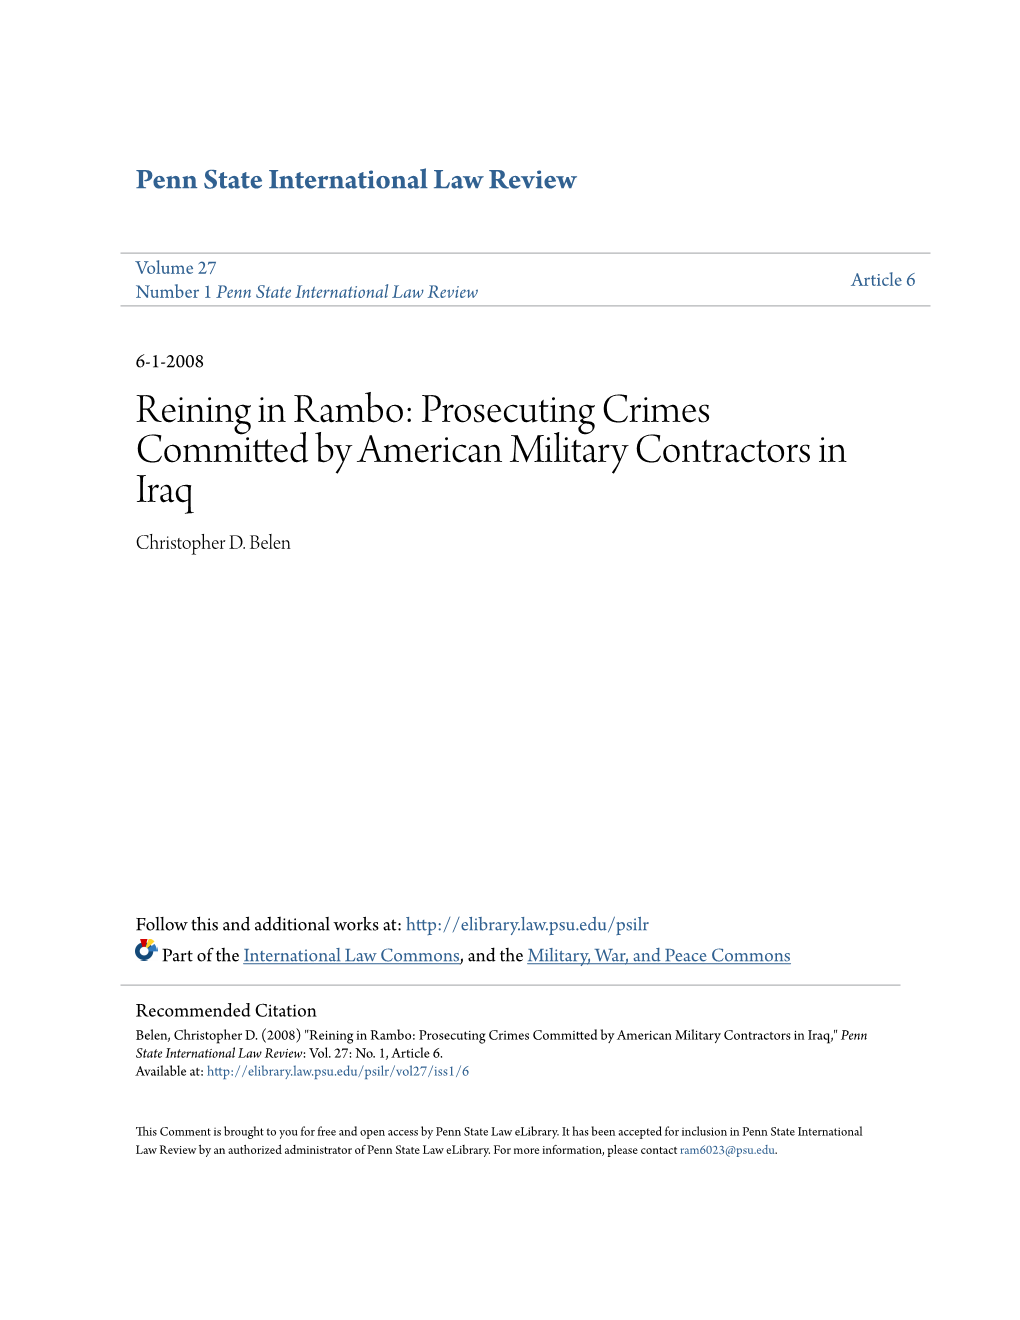 Prosecuting Crimes Committed by American Military Contractors in Iraq Christopher D